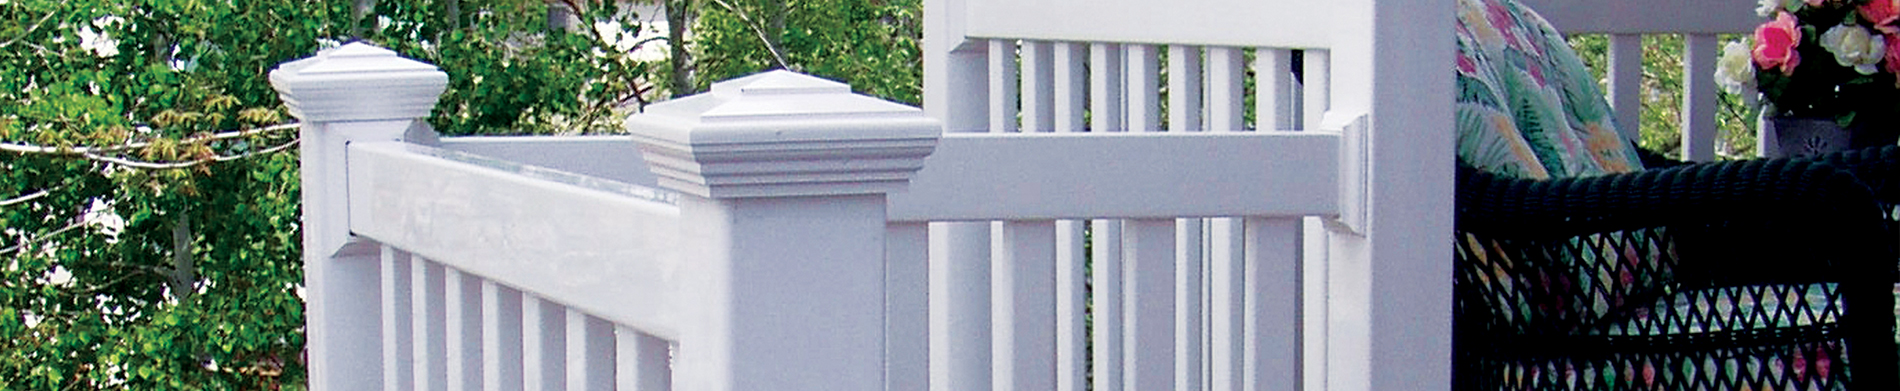 Why should you have an old fence when you can afford a long-lasting vinyl fence?